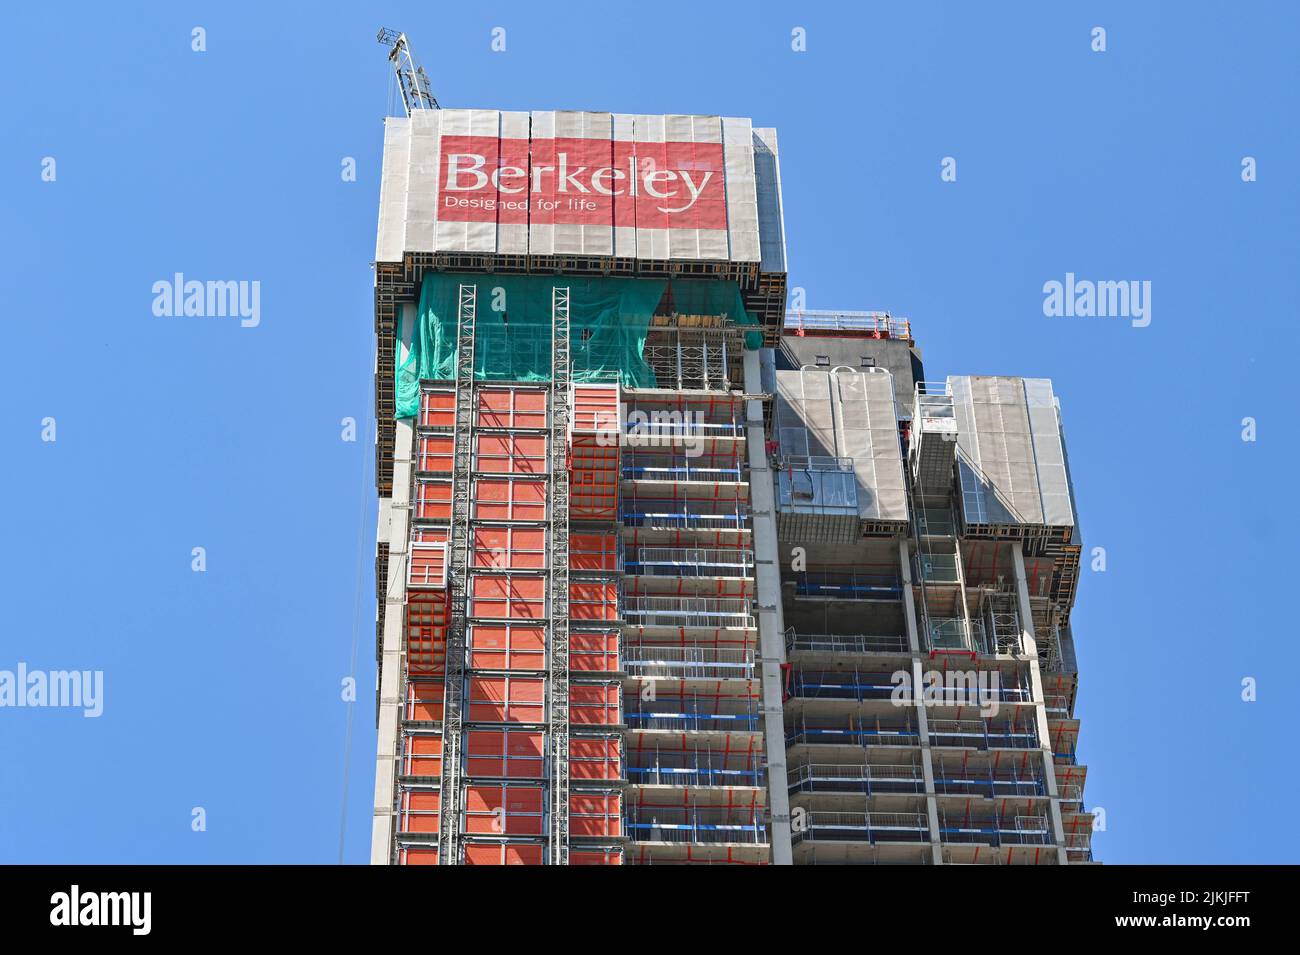 London, England - June 2022: Exterior view of a new block of apartments being built in Canary Wharf. The developer is Berkley Homes. Stock Photo